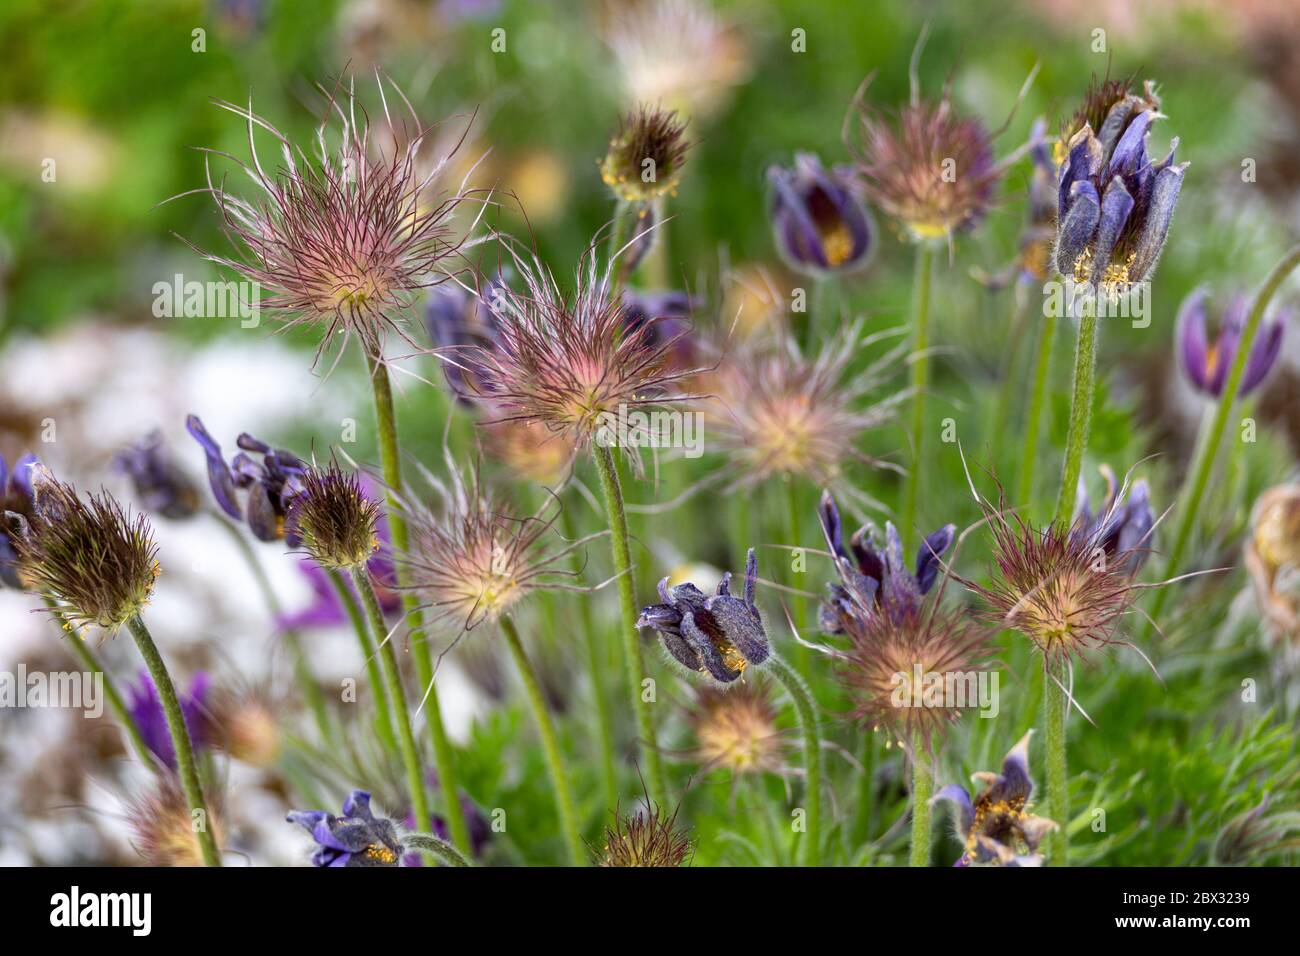 Pulsatilla montana, one of the species of genus Pulsatilla, known as easter flower or meadow anemone or pasque flower or prairie crocus or wind flower Stock Photo